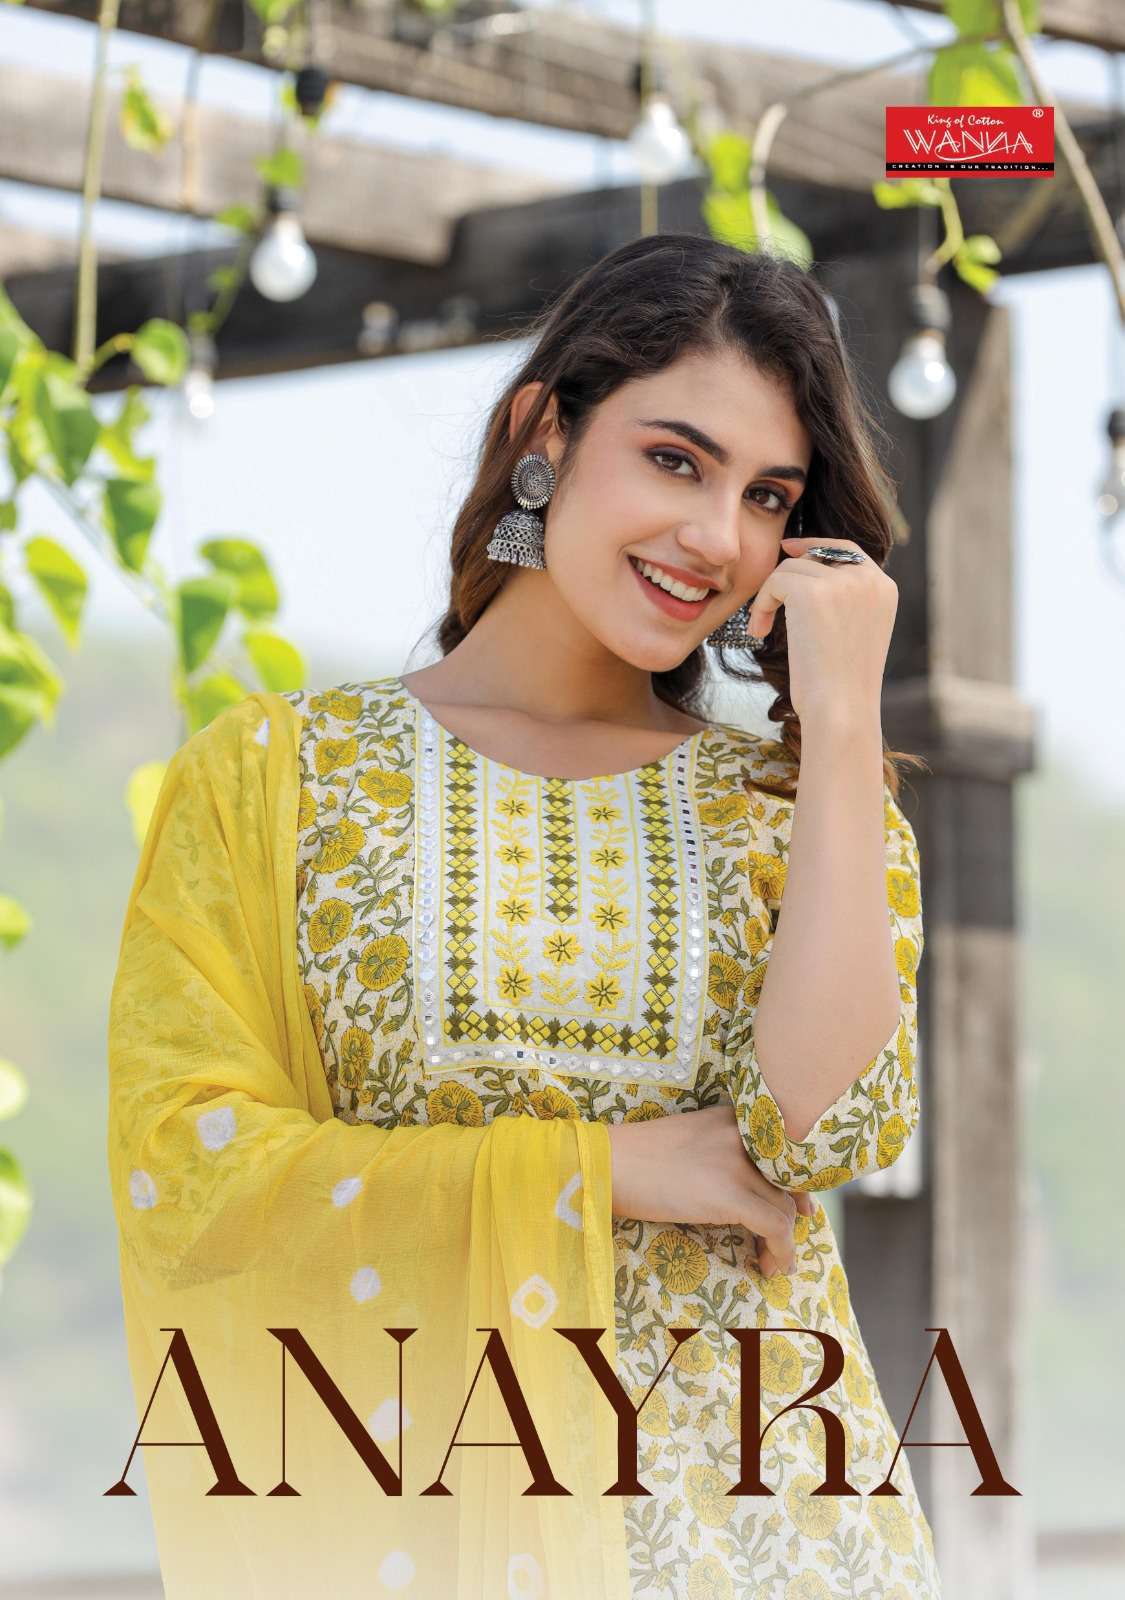 wanna anayra series 101-106 Pure & Finest Quality Of Cotton suit